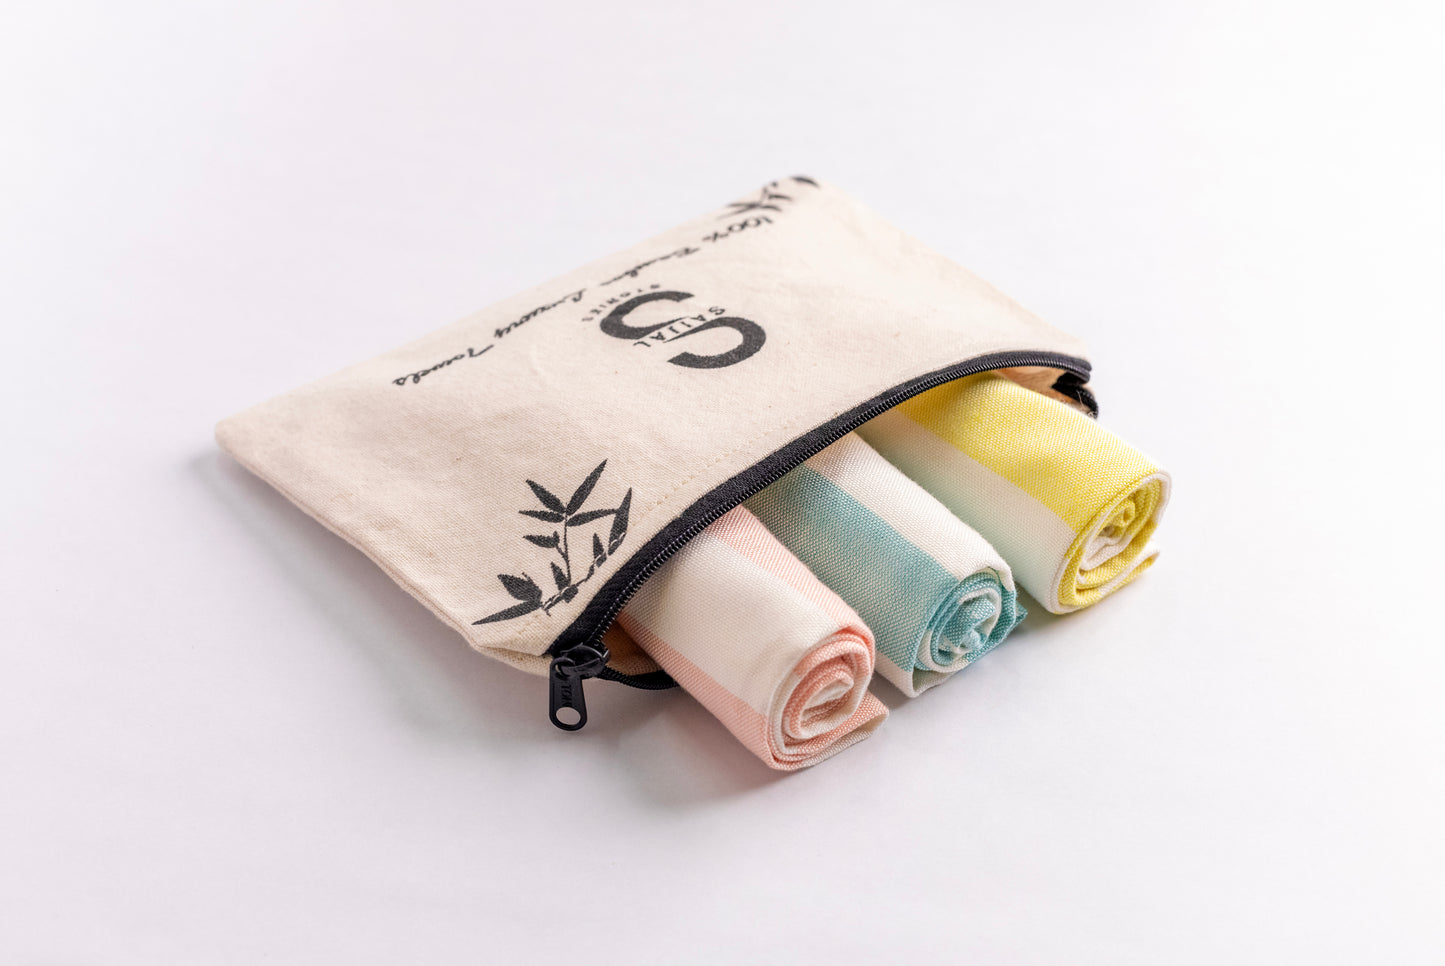 Multipurpose Bamboo Towels - Pack of 3 (Mint Blue, Peach, Golden Yellow)